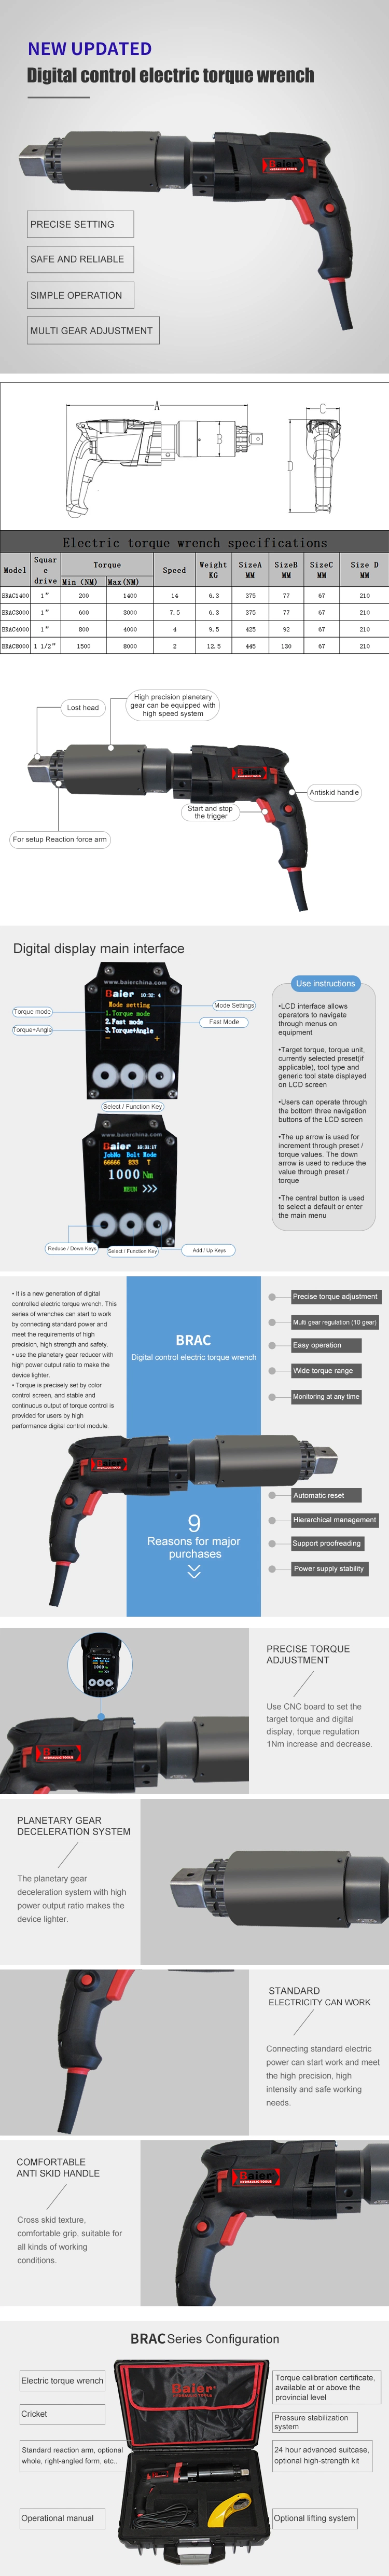 Planetary Gearbox High Precision Bolting Tool Baier Electric Torque Wrench